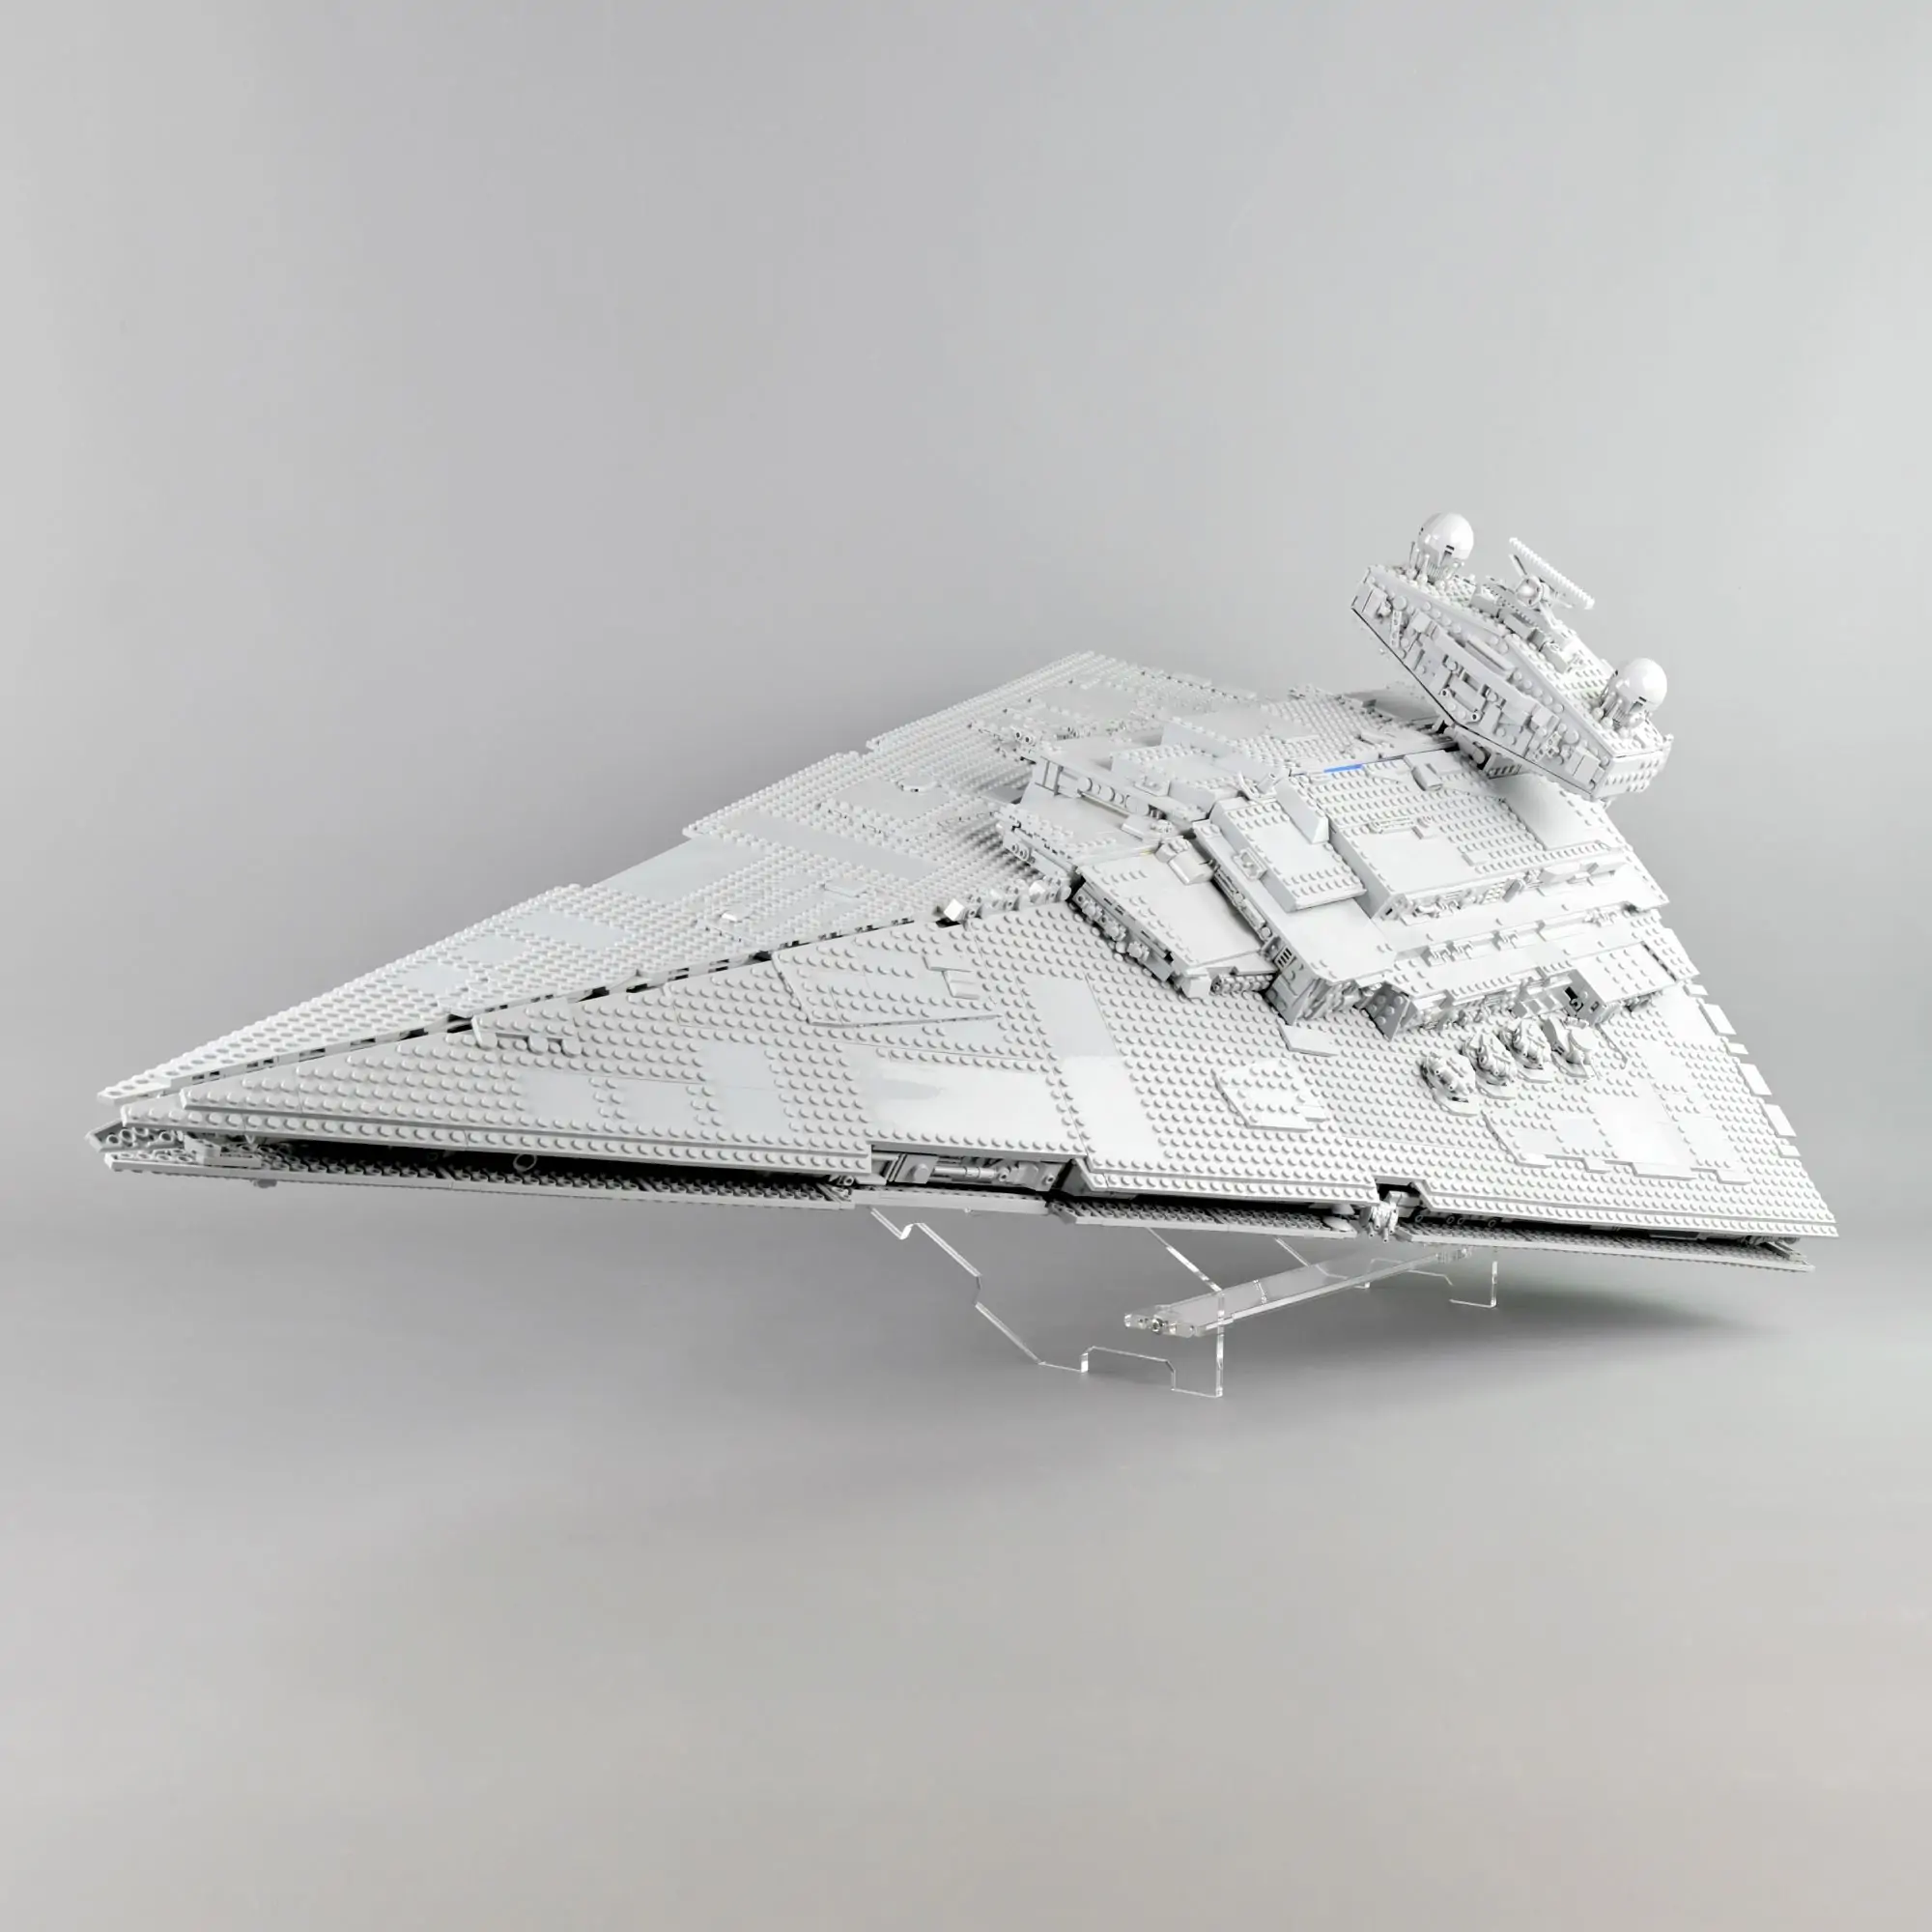 LEGO UCS Imperial Star Destroyer Clear Acrylic Display Stand